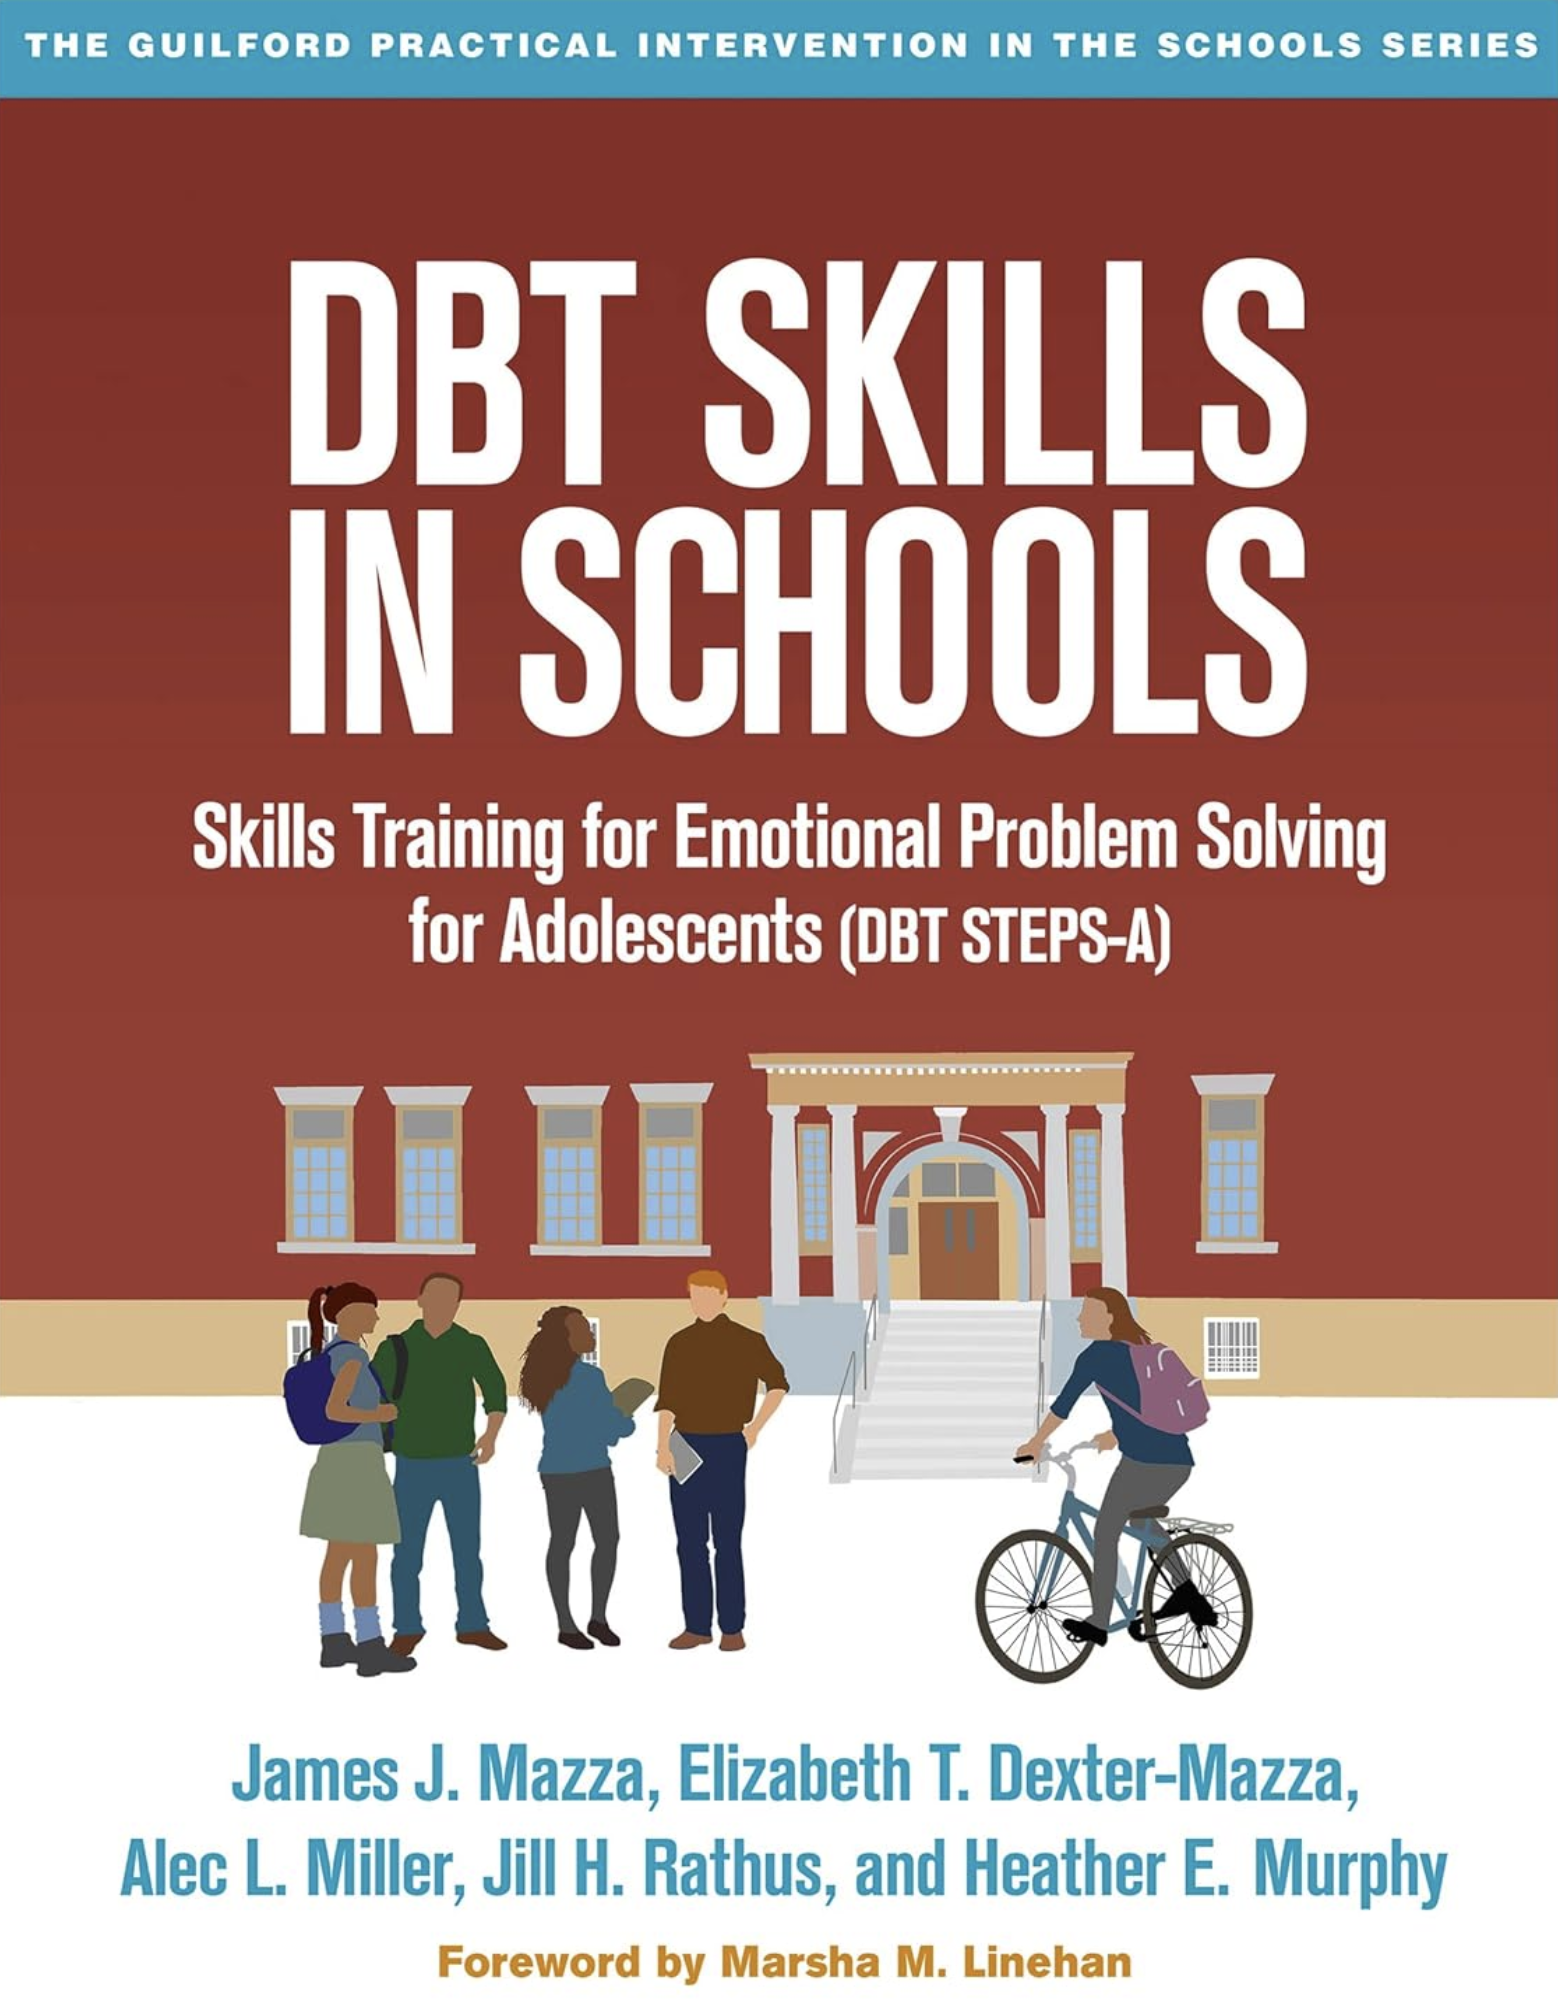 Book cover of "DBT Skills in Schools: Skills Training for Emotional Problem Solving for Adolescents"